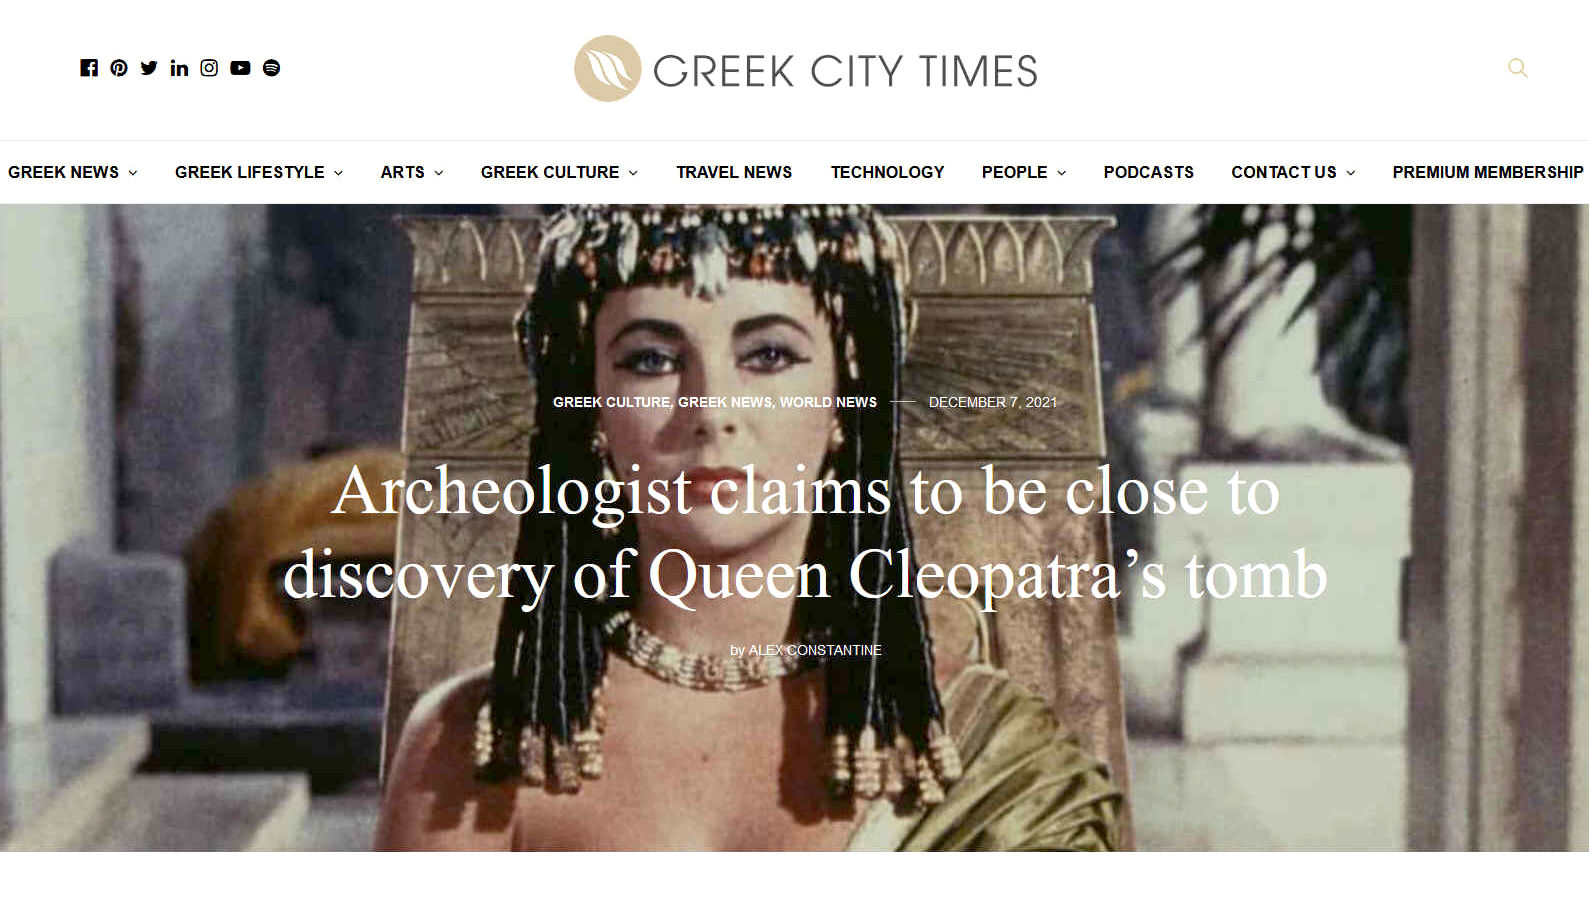 Archaeologist claims to be close to discovery of Cleopatra's tomb